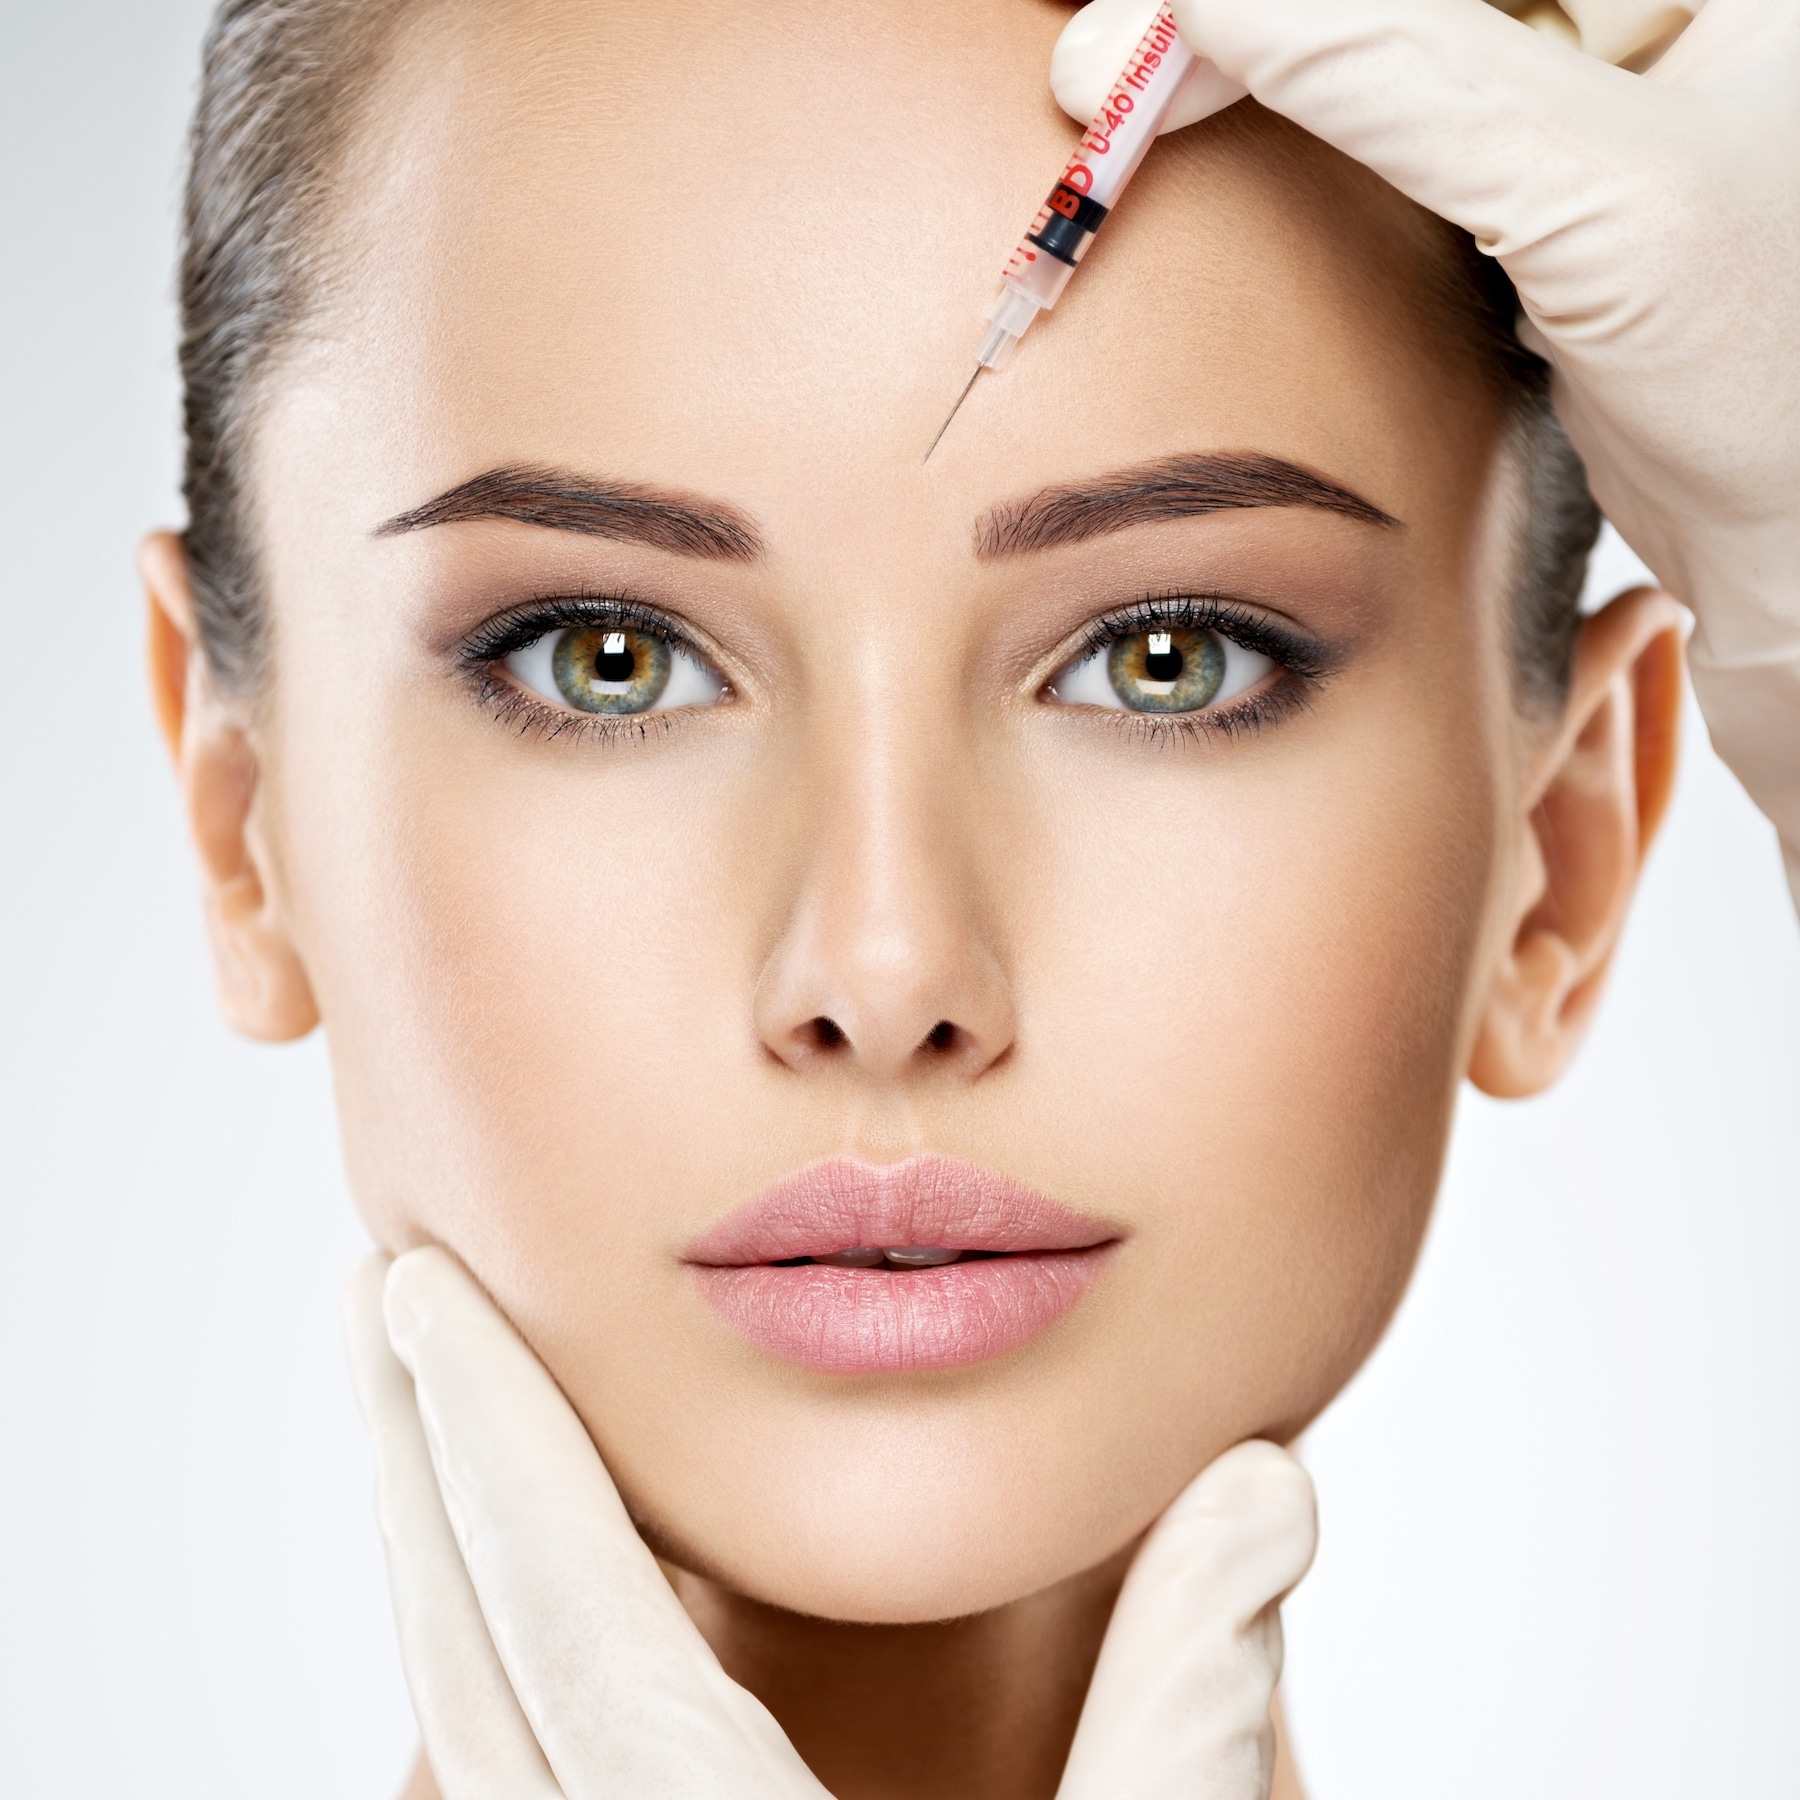 New Ways To Fix Bad Botox Complications Droopy Eyelids, Eyebrows ...